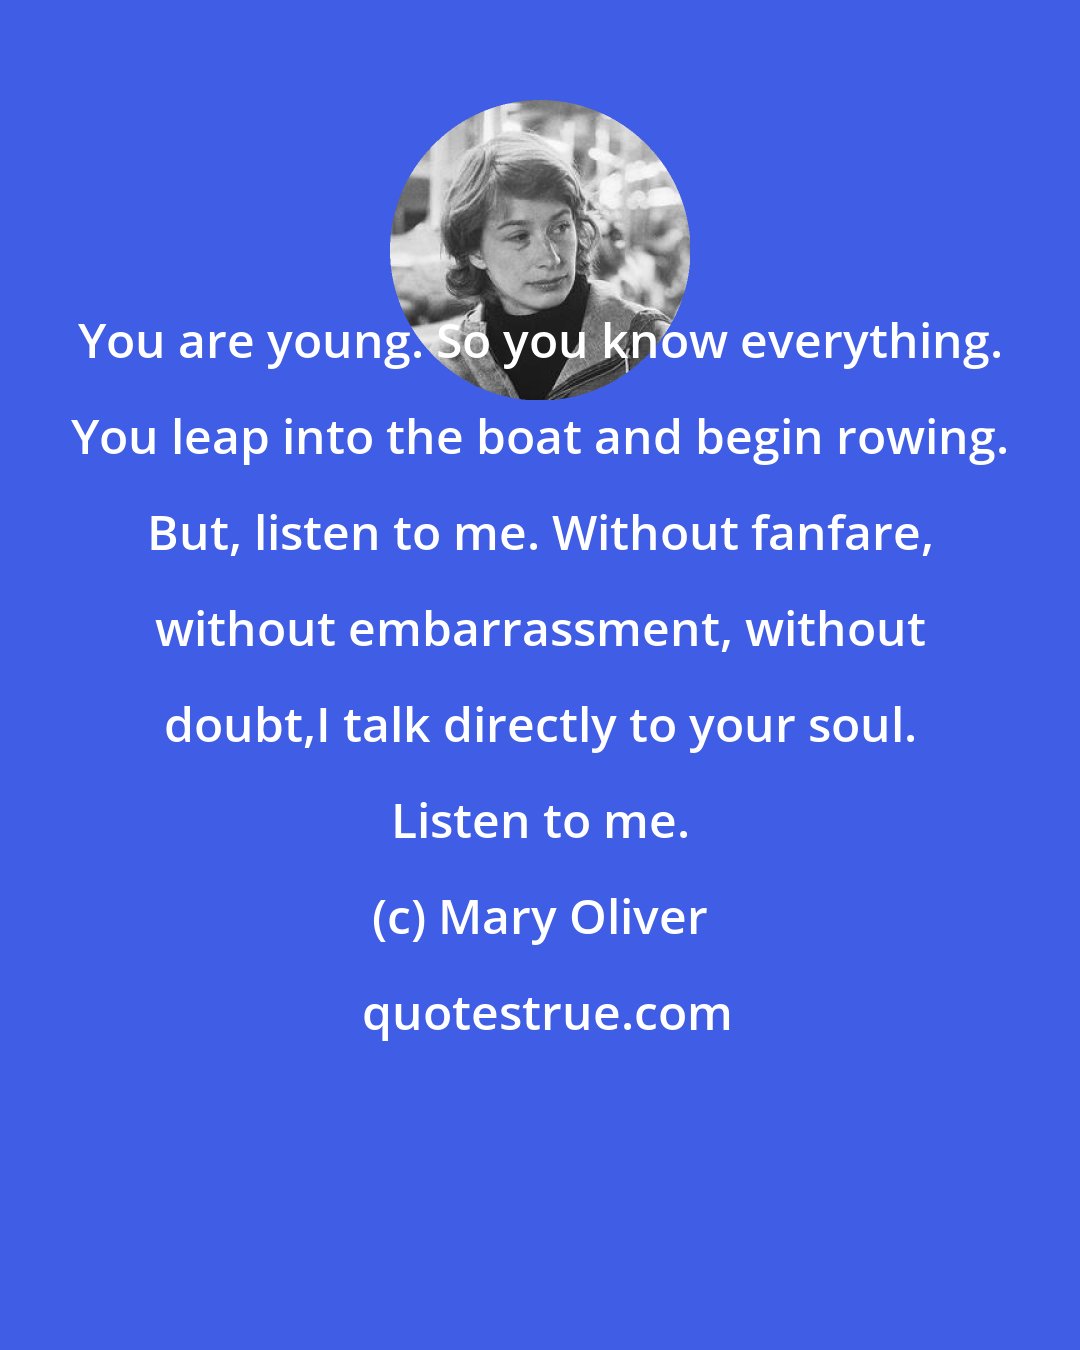 Mary Oliver: You are young. So you know everything. You leap into the boat and begin rowing. But, listen to me. Without fanfare, without embarrassment, without doubt,I talk directly to your soul. Listen to me.